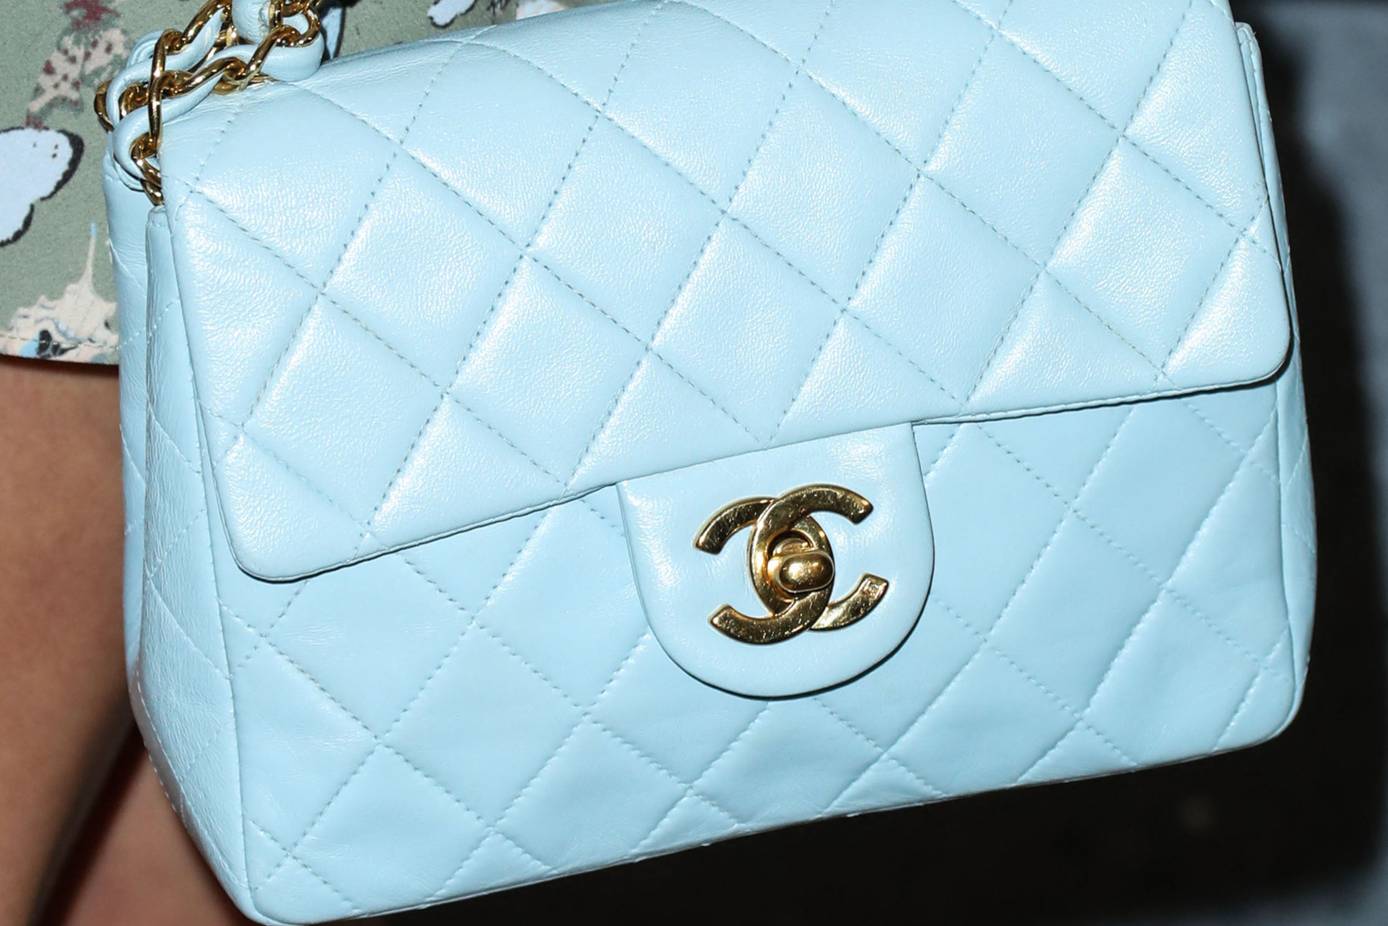 Chanel stops selling bags to Russians abroad who want to take them home